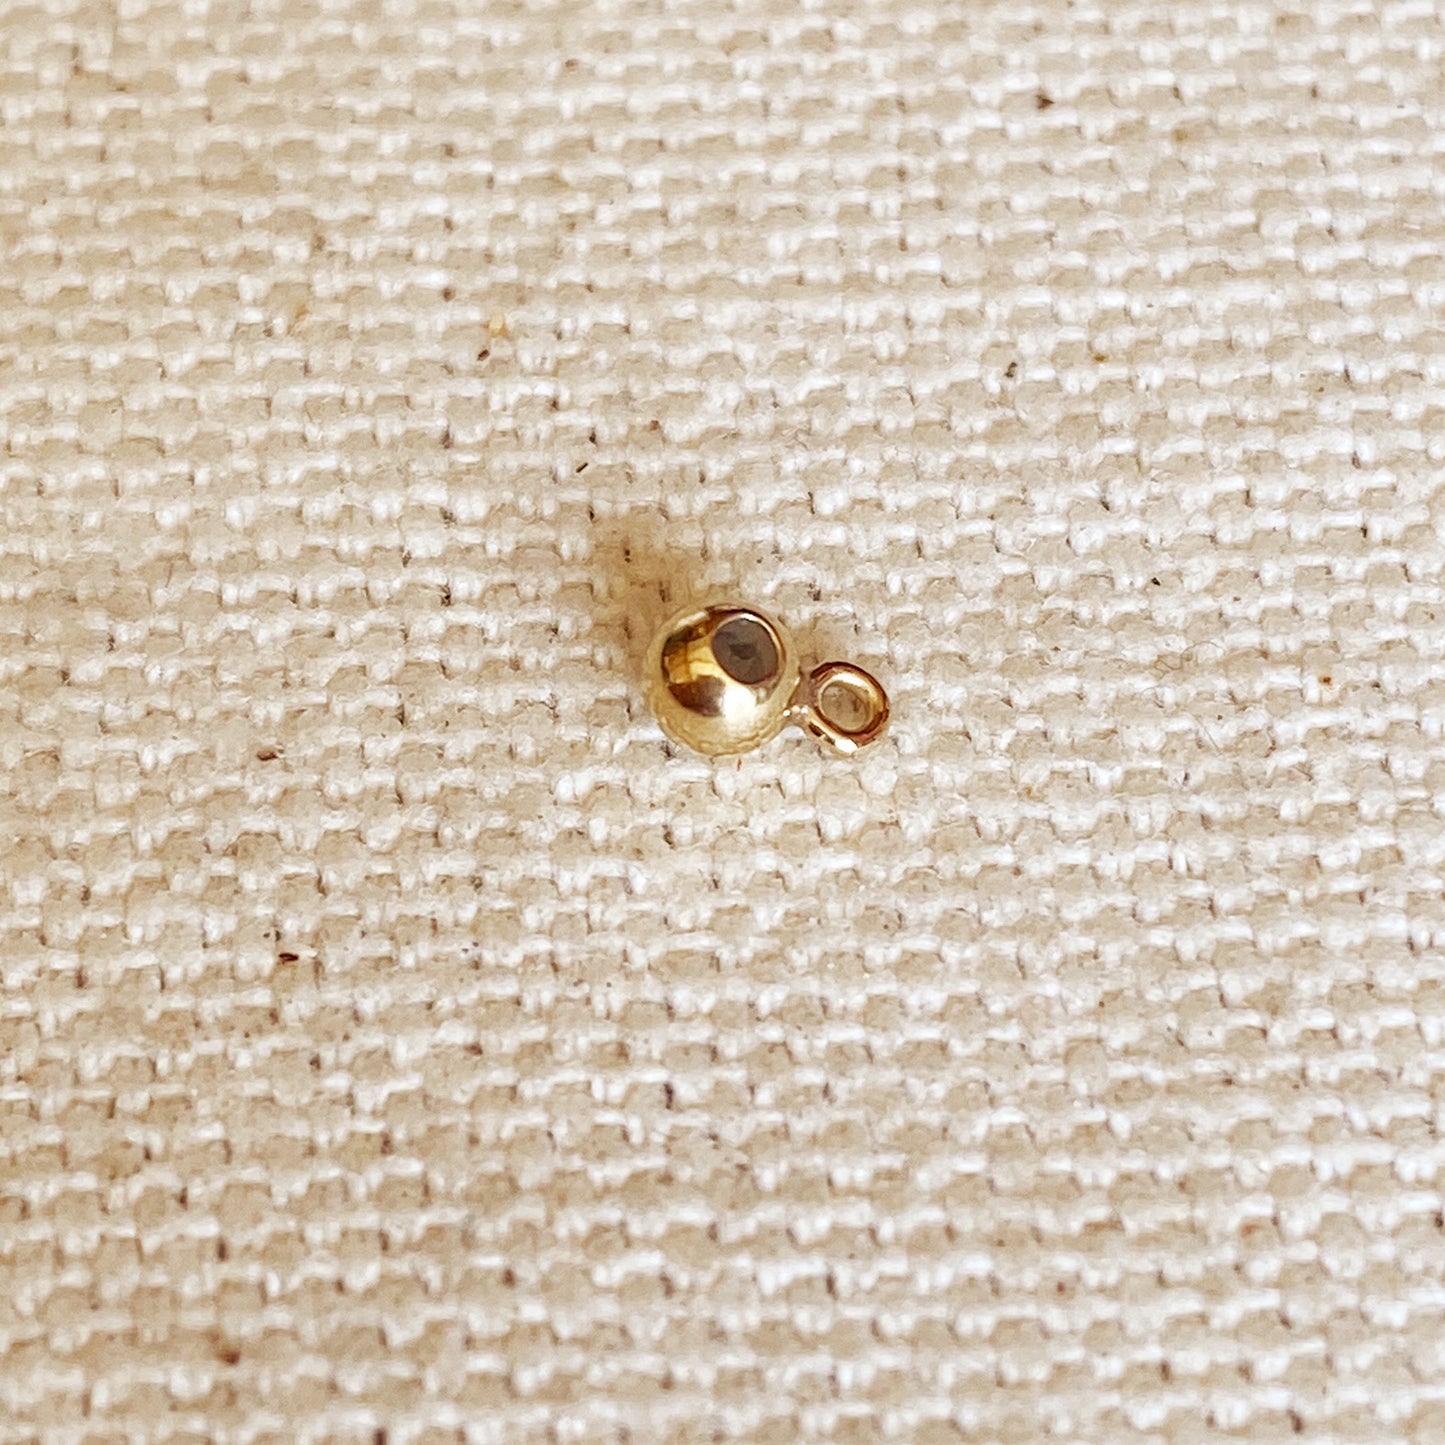 GoldFi 14k Gold Filled 3mm Bead w/Closed Ring